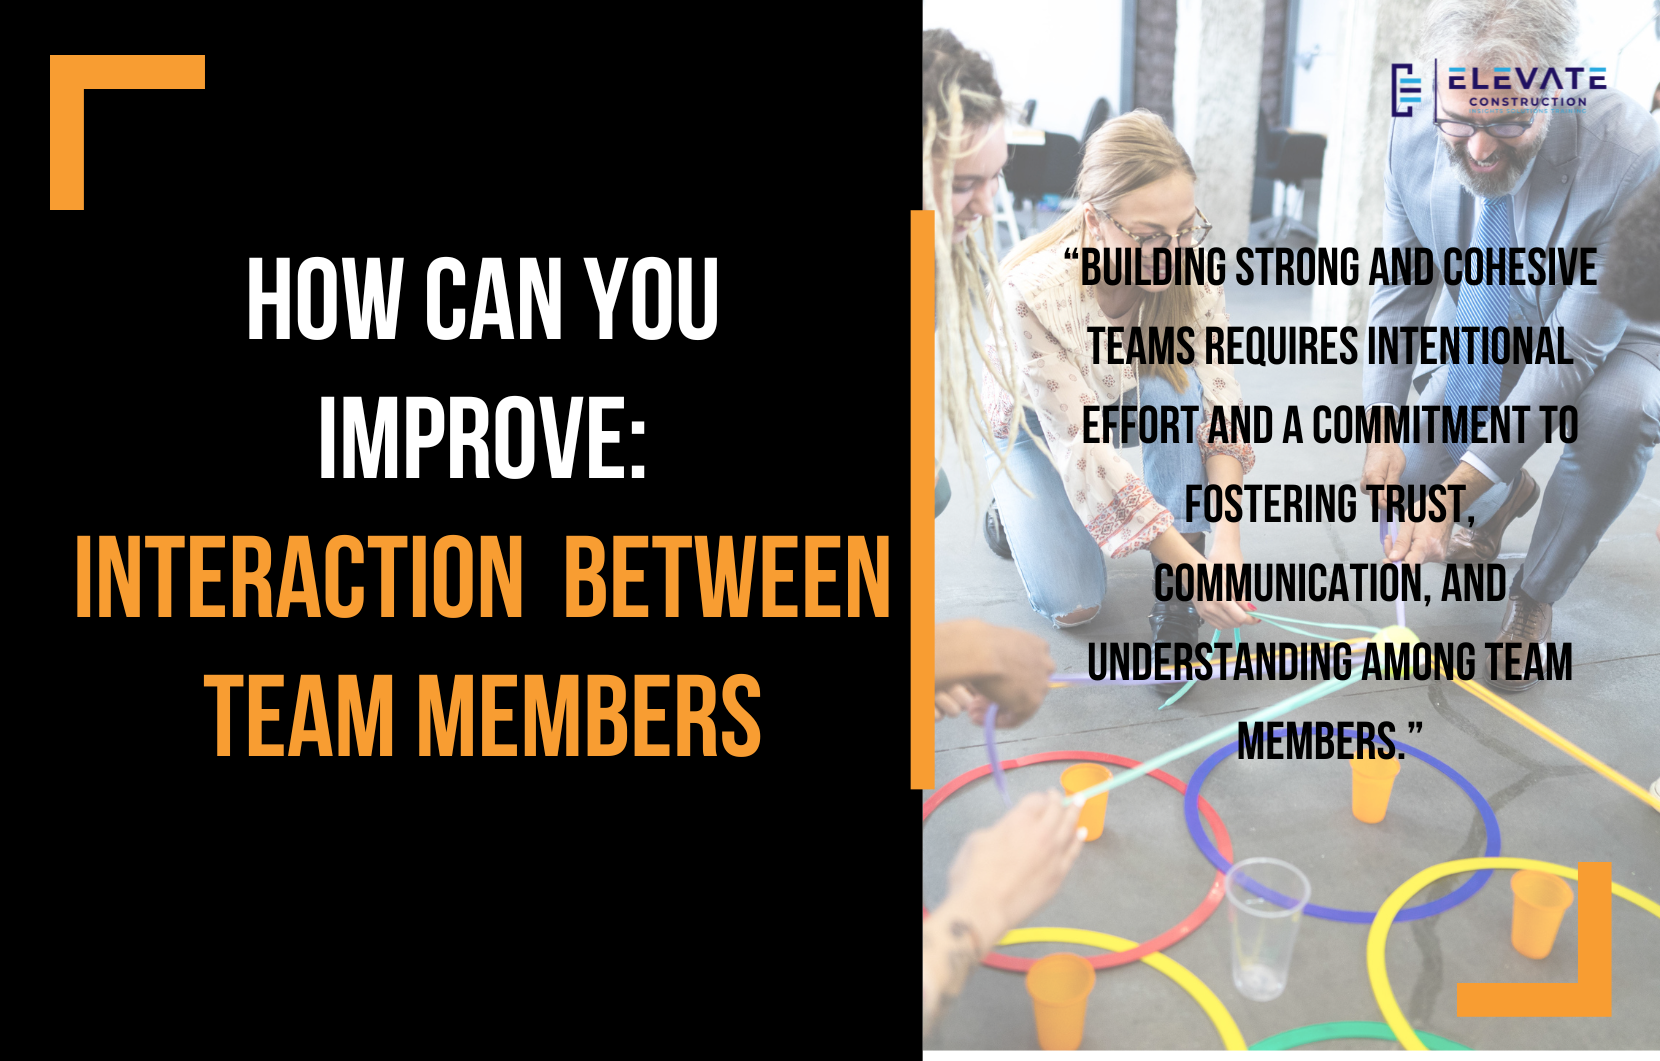 How Can You Improve Interaction Between Team Members?